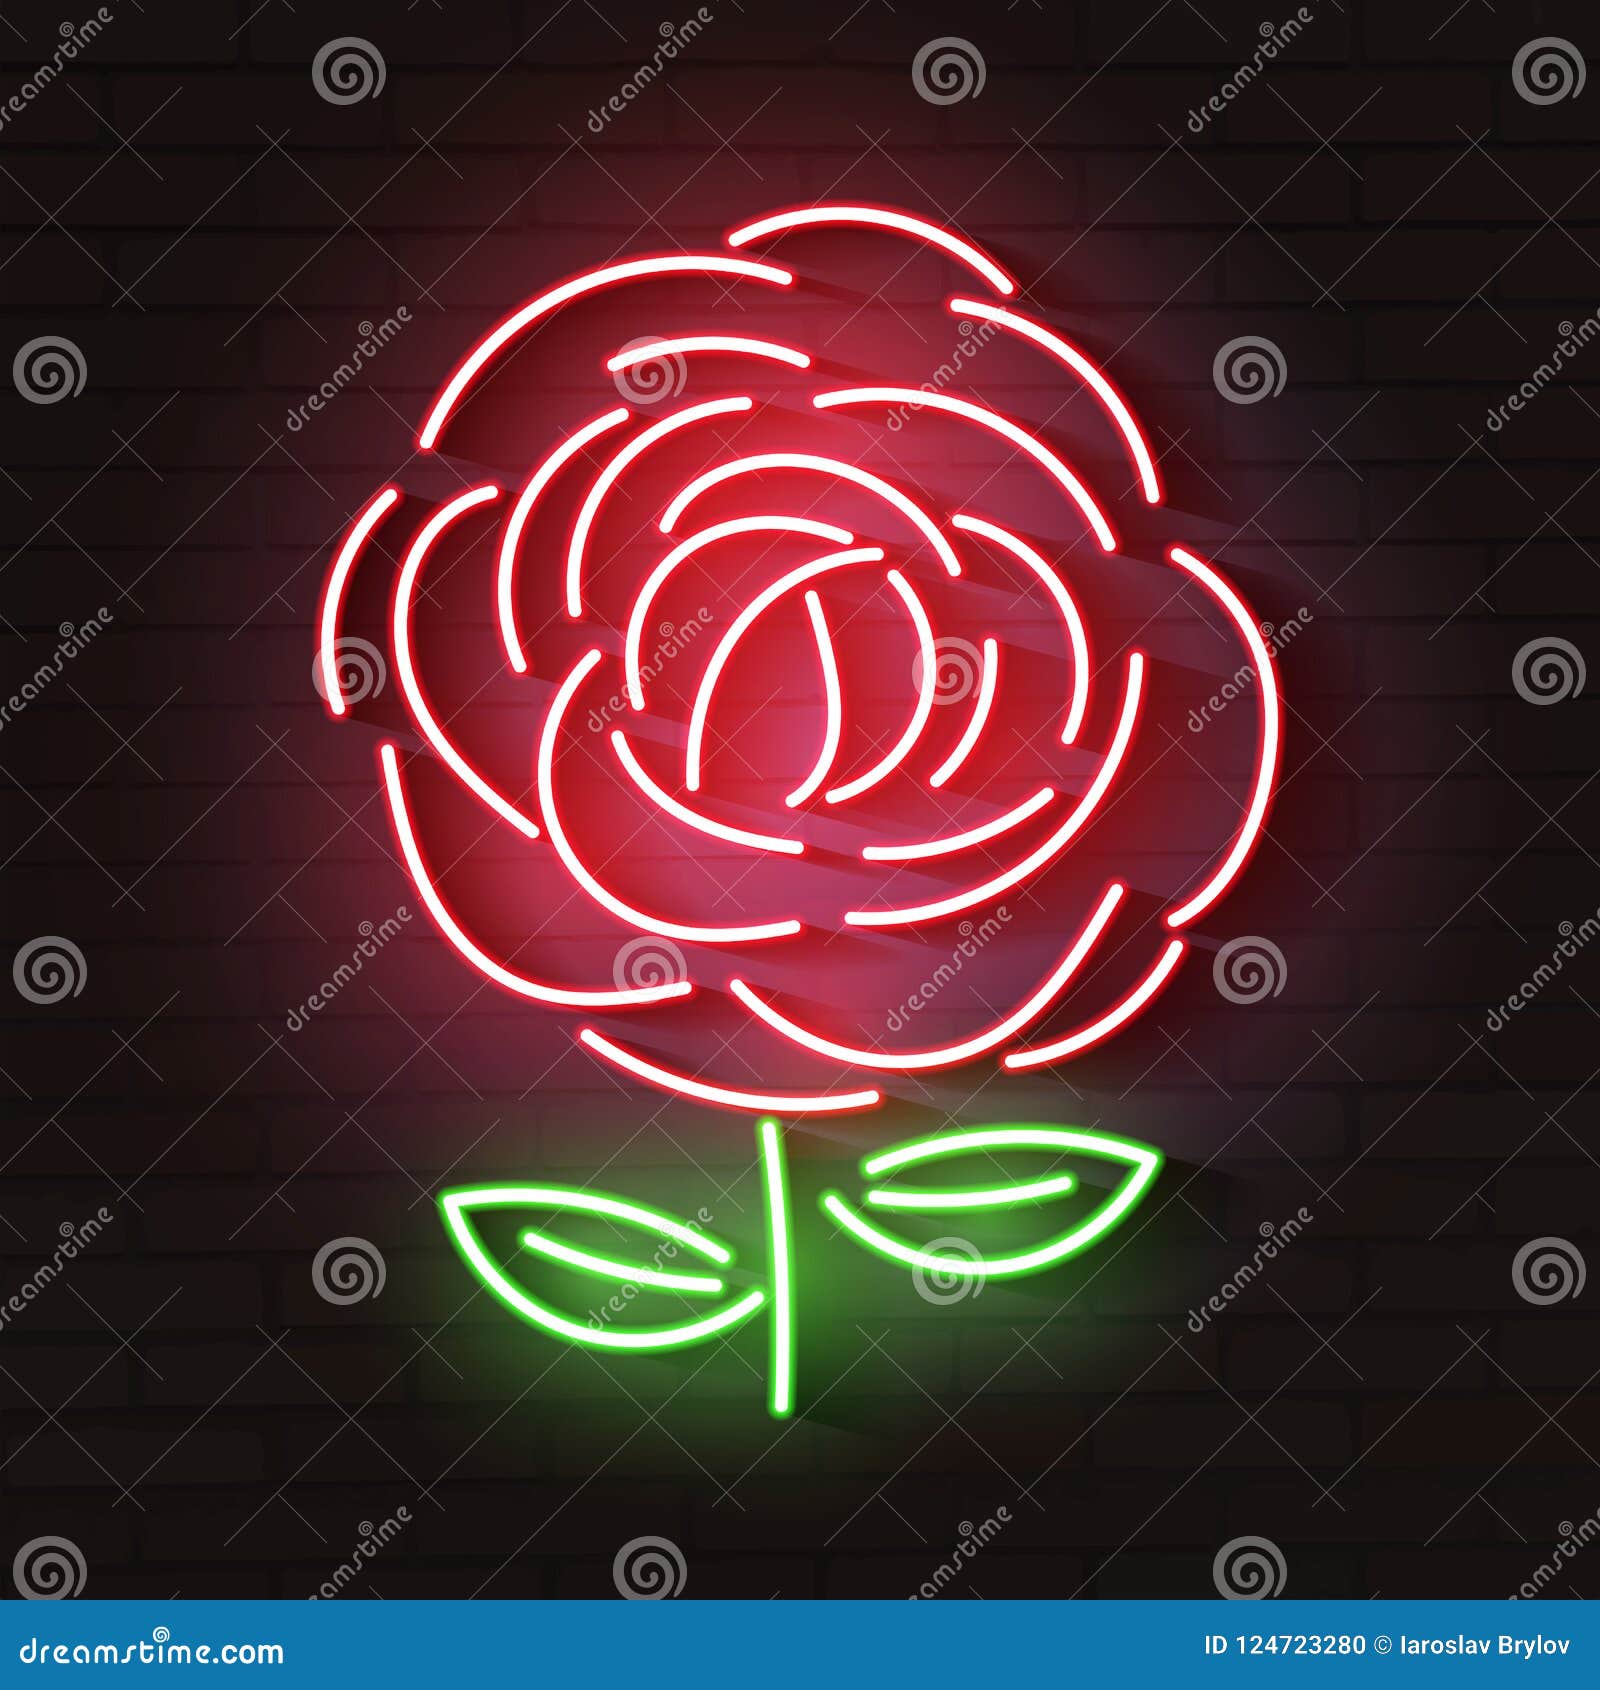 Neon Rose Vector Images (over 3,400)